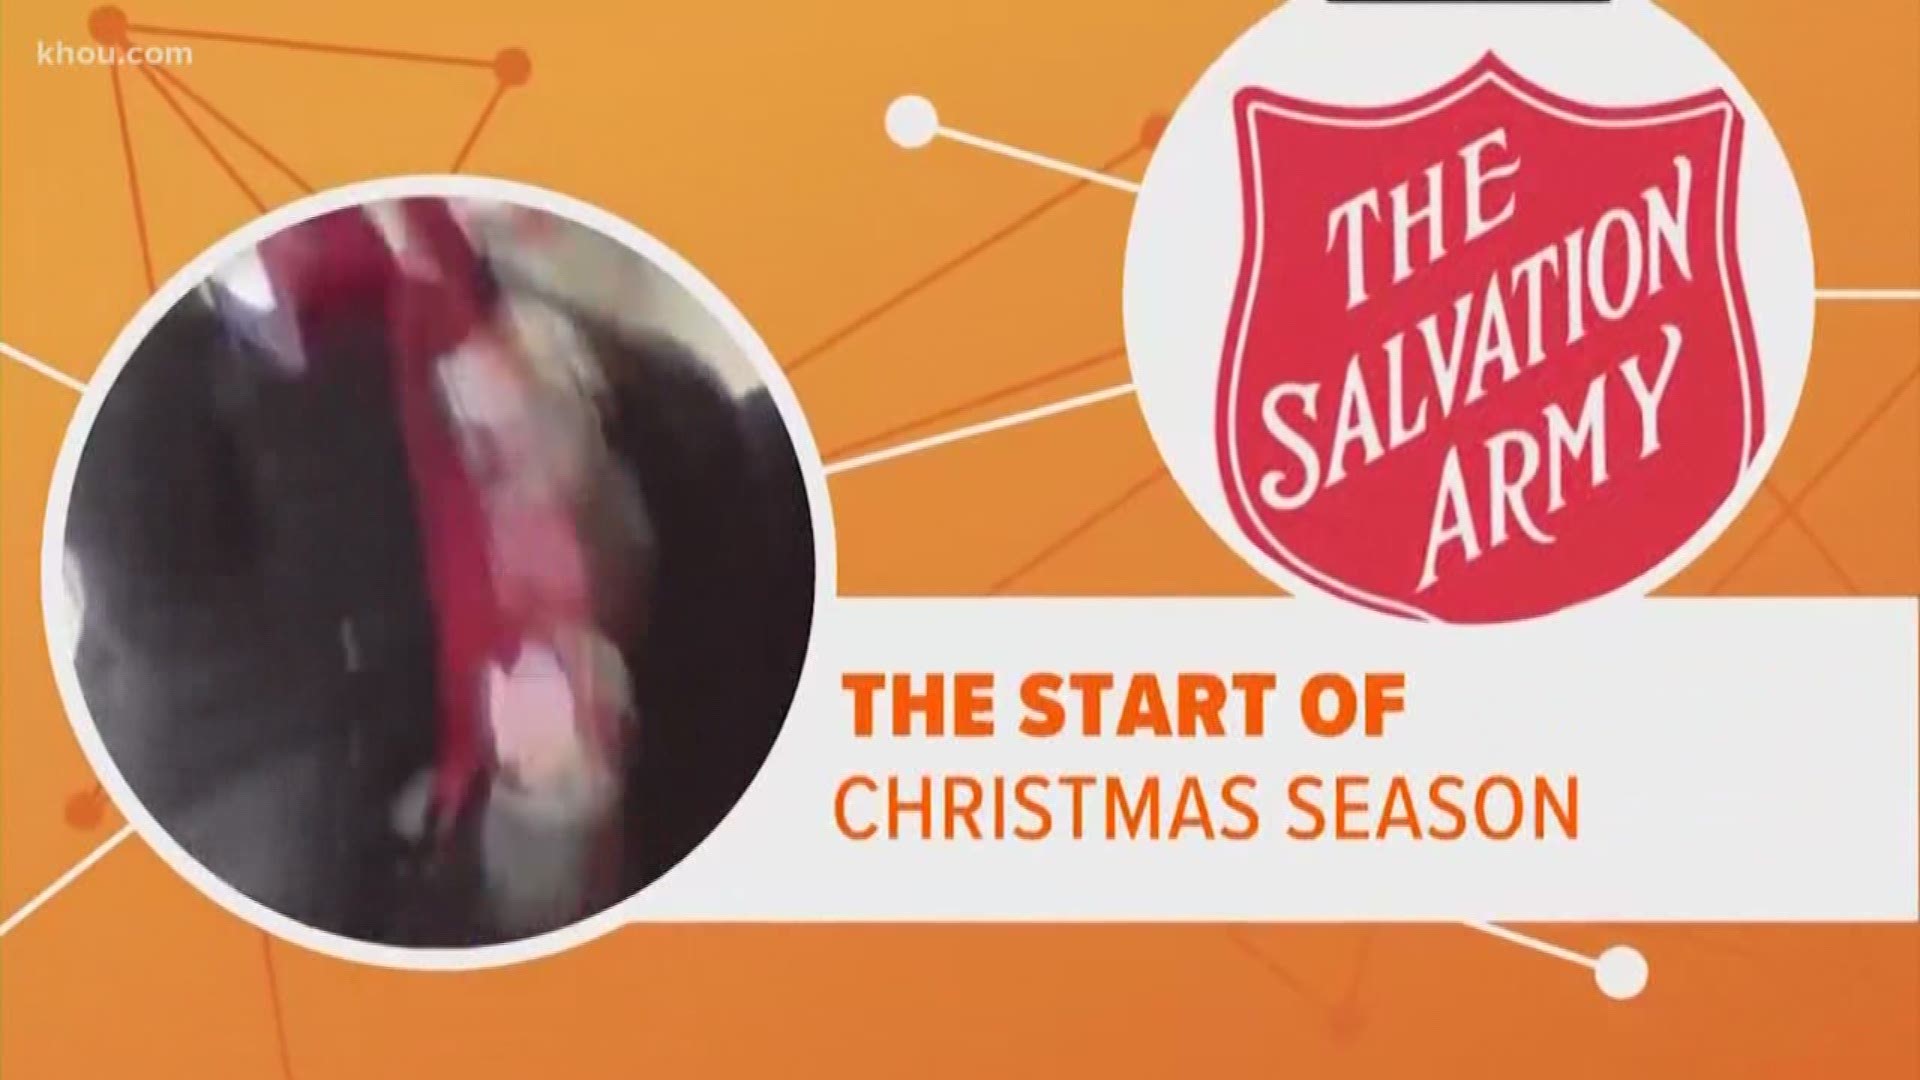 Get ready to see red kettles during your holiday shopping. The Salvation Army's annual campaign is now underway. How can you help?